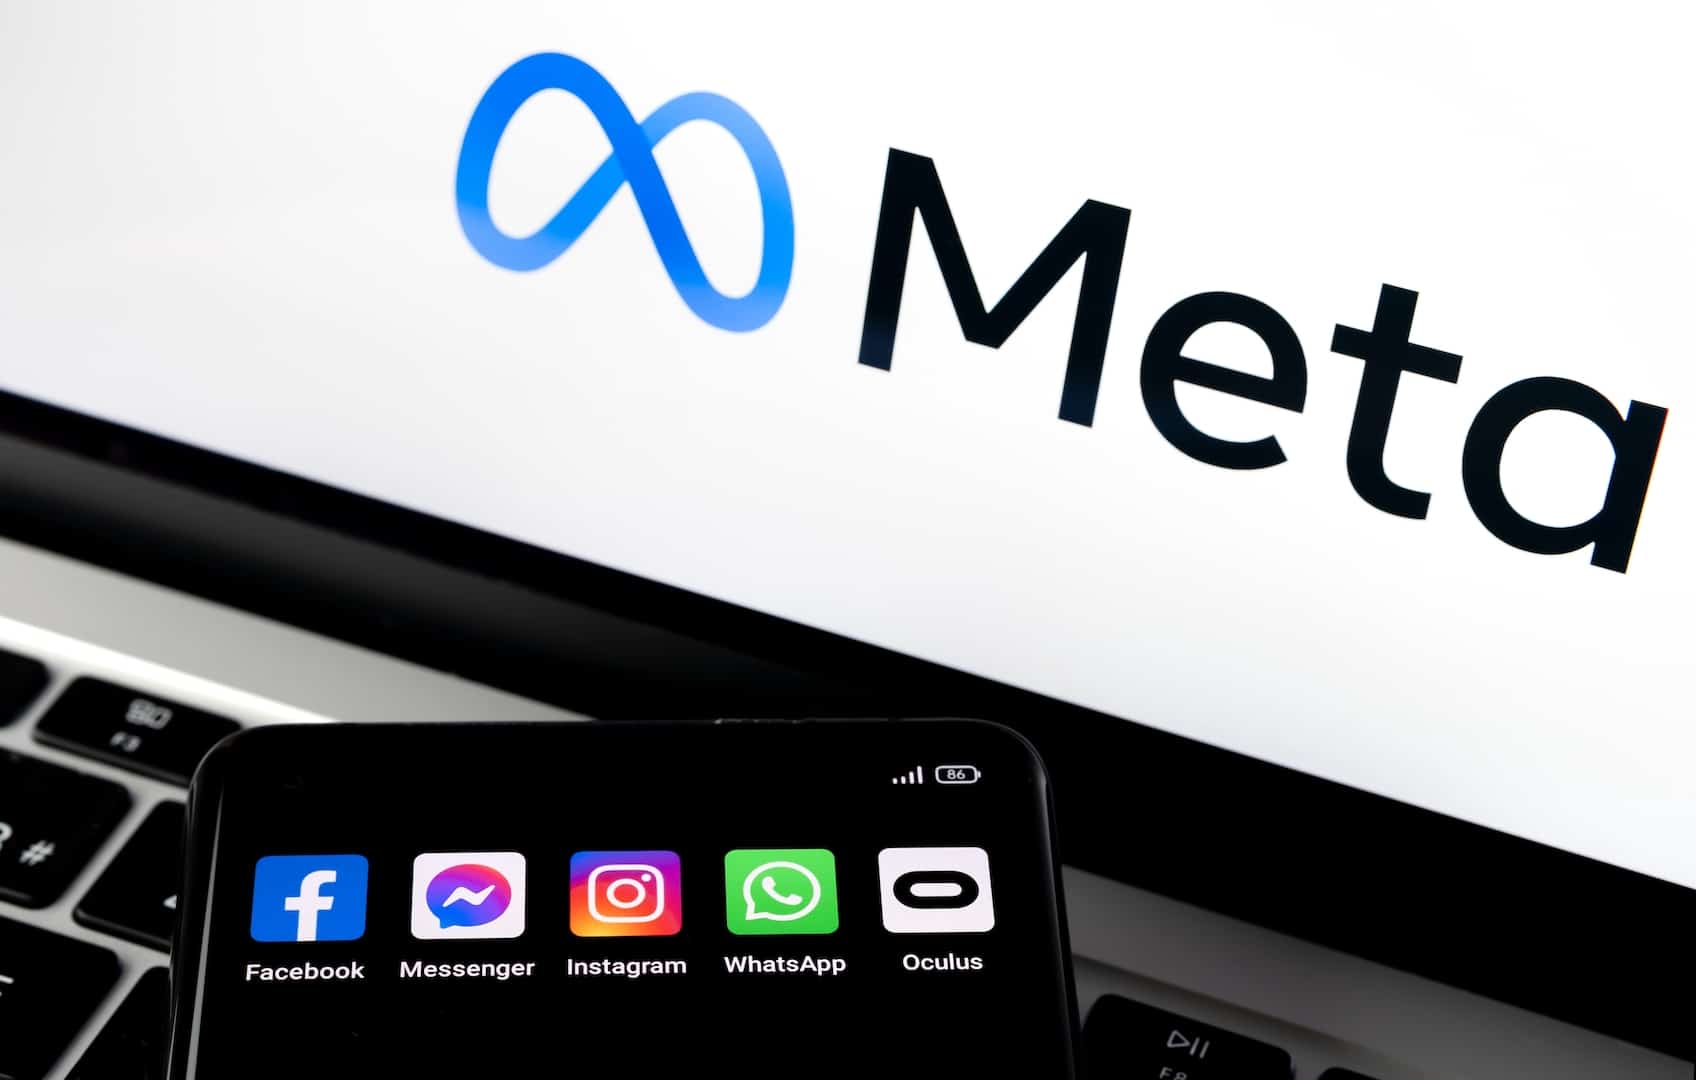 #Lawsuit: Meta placed ads next to content sexualizing minors